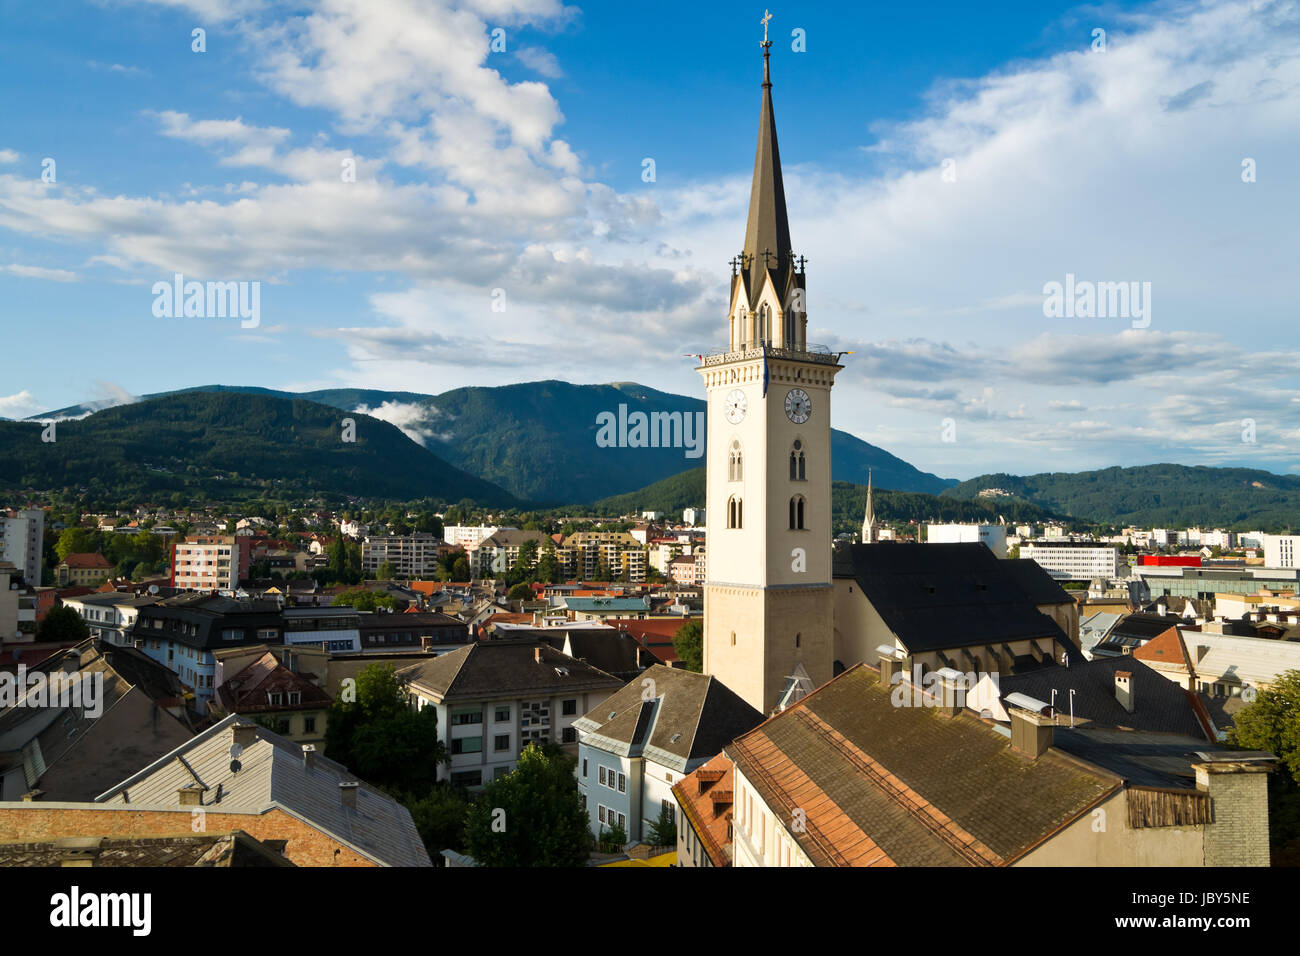 Aerial view over the town center and the biggest church of Villach in Carinthia/Austria on a sunny day. Villach belongs to the largest cities of Austria and is nicely surrounded by several mountains. Stock Photo